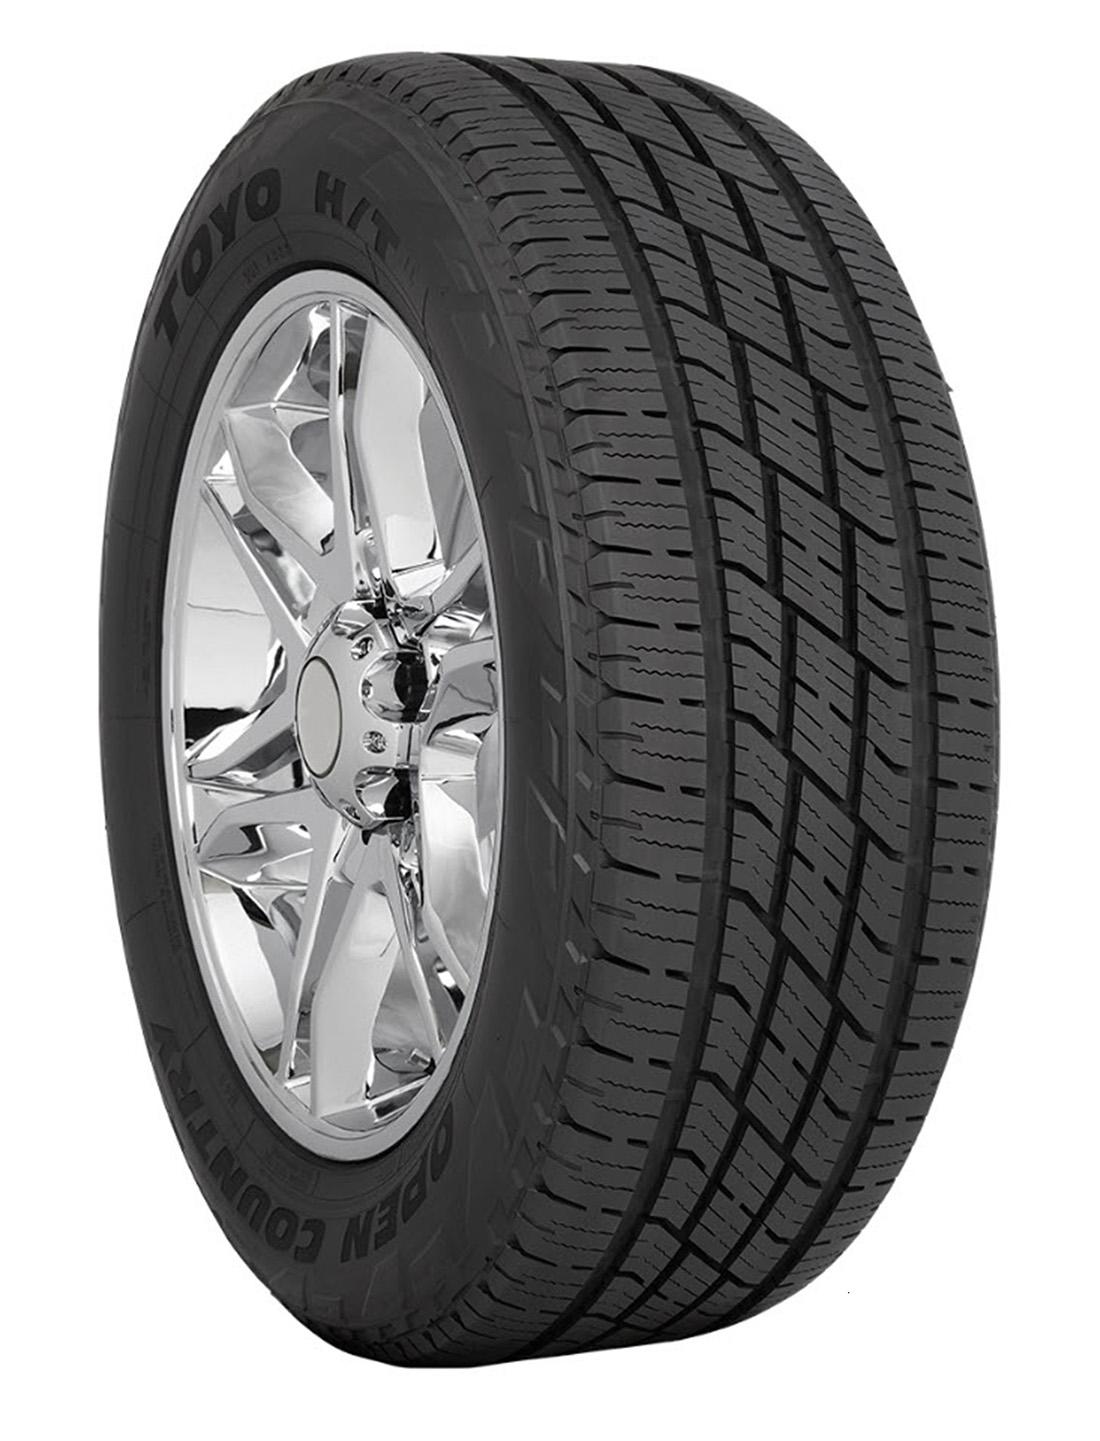 Toyo - PROXES HT  NW  295/30R22